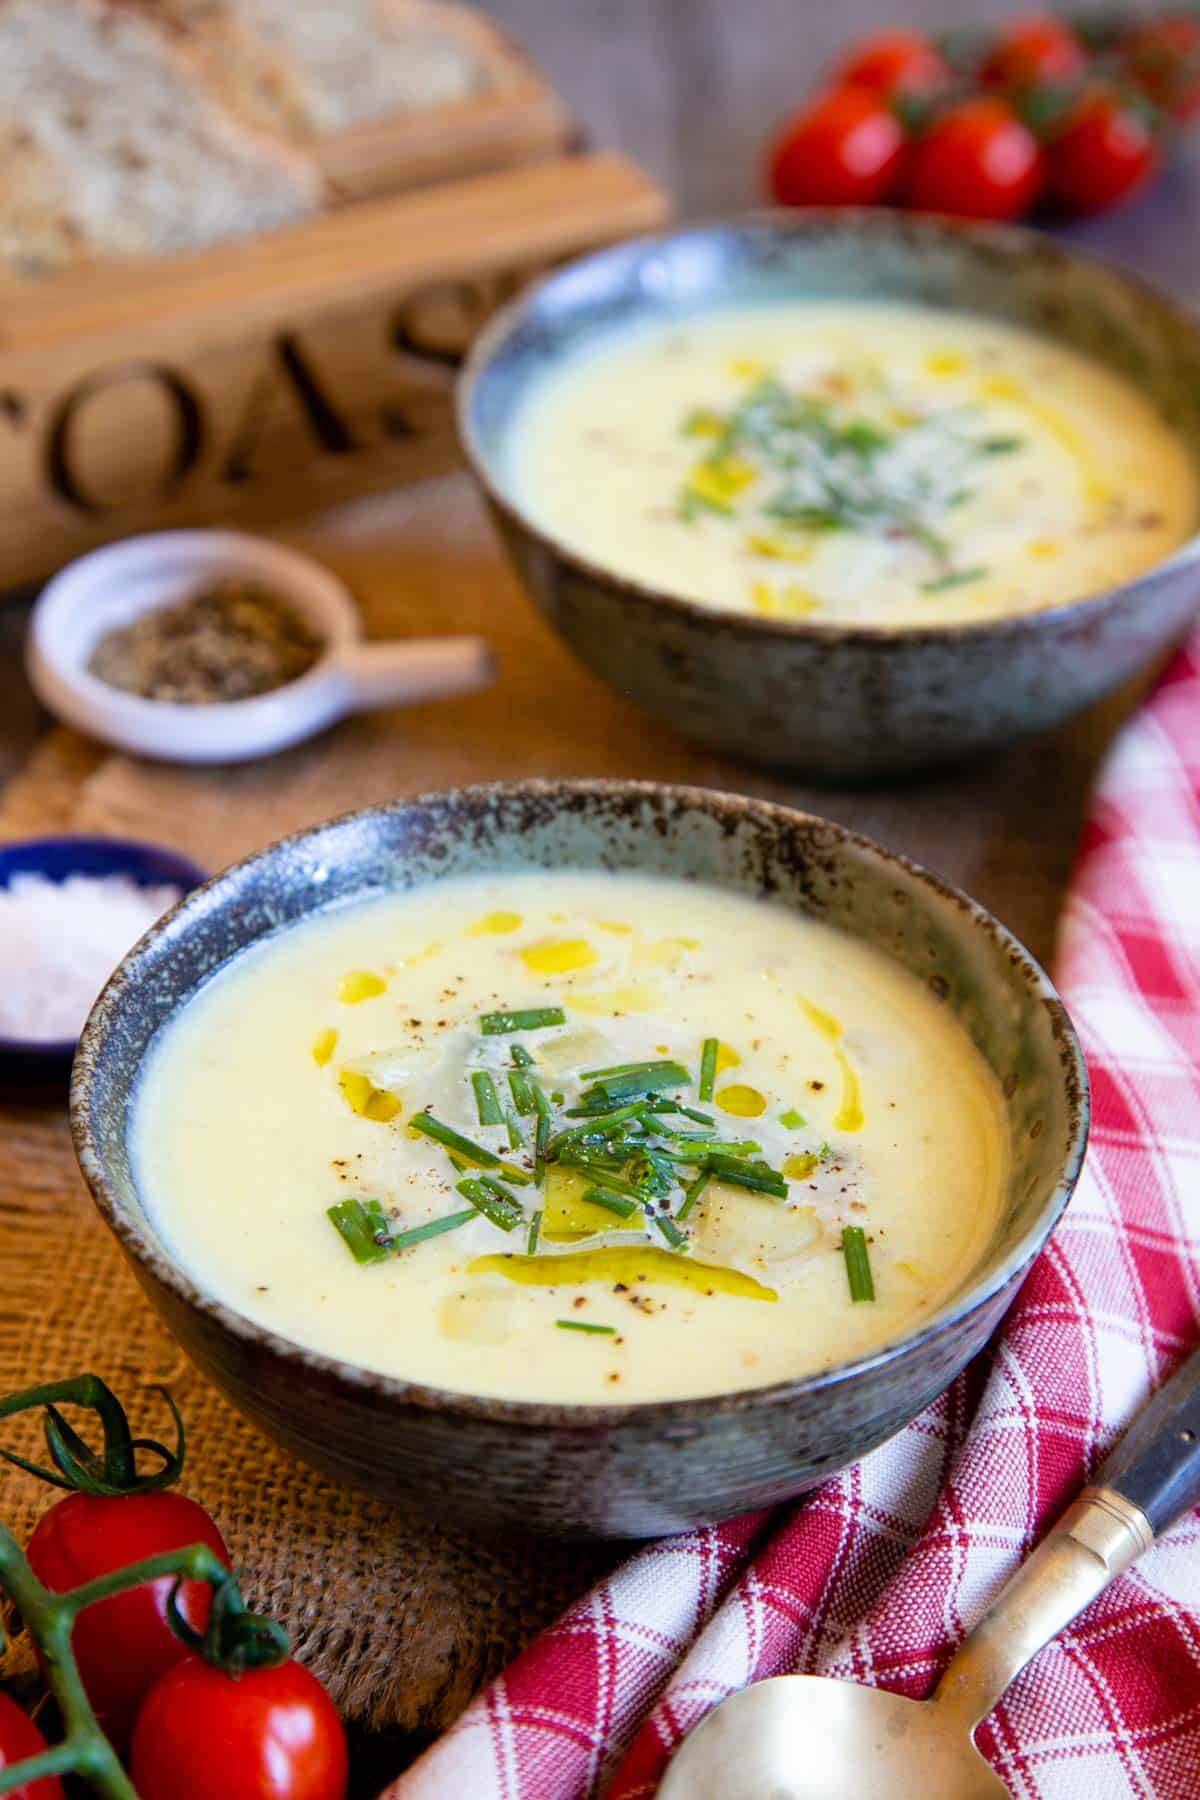 Creamy leek and potato soup, dotted with oil and garnished with snipped chives, elegant and simple served in stylish stoneware bowls